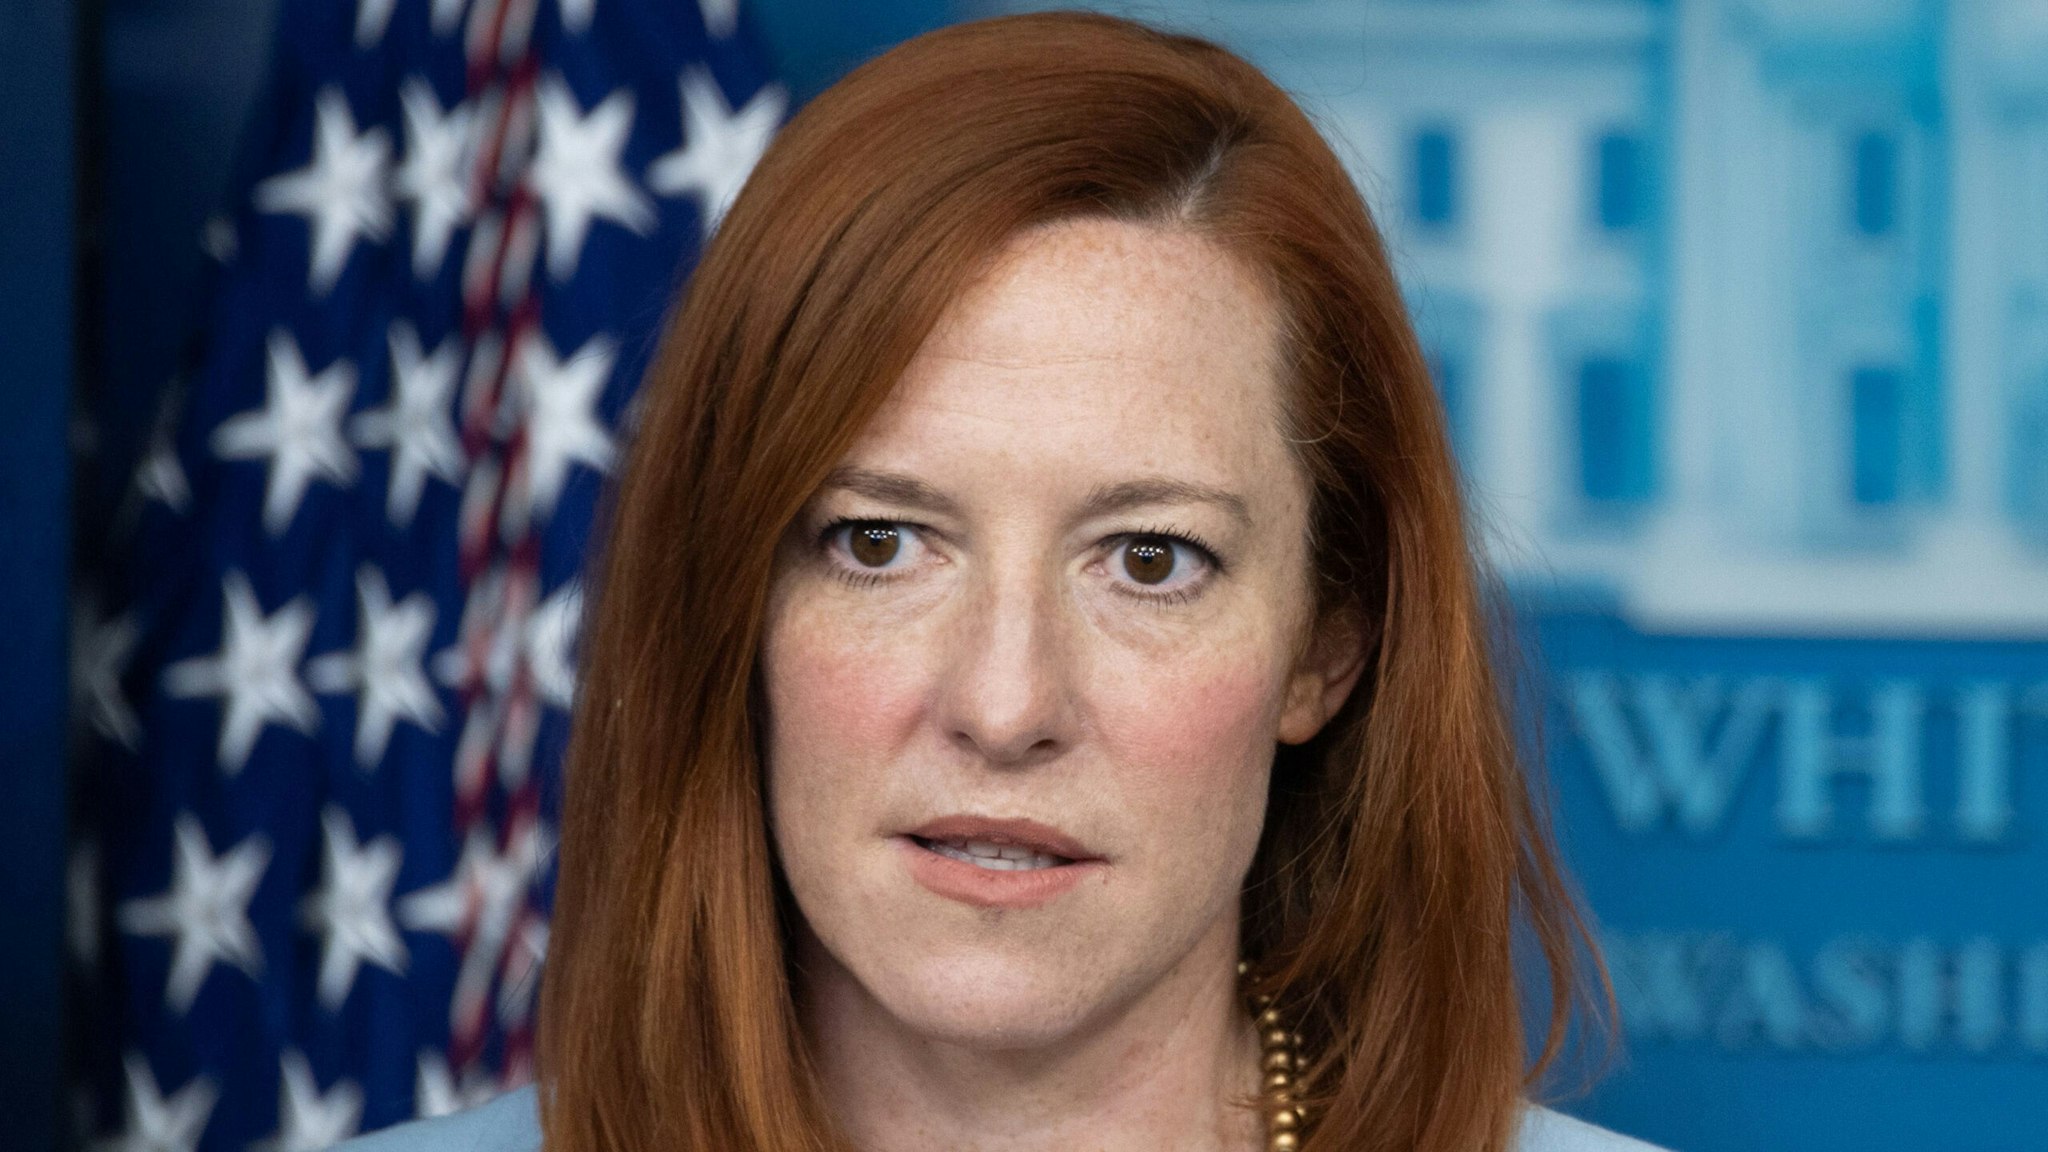 White House Press Secretary Jen Psaki holds a press briefing in the Brady Briefing Room of the White House in Washington, DC. on February 10, 2021.